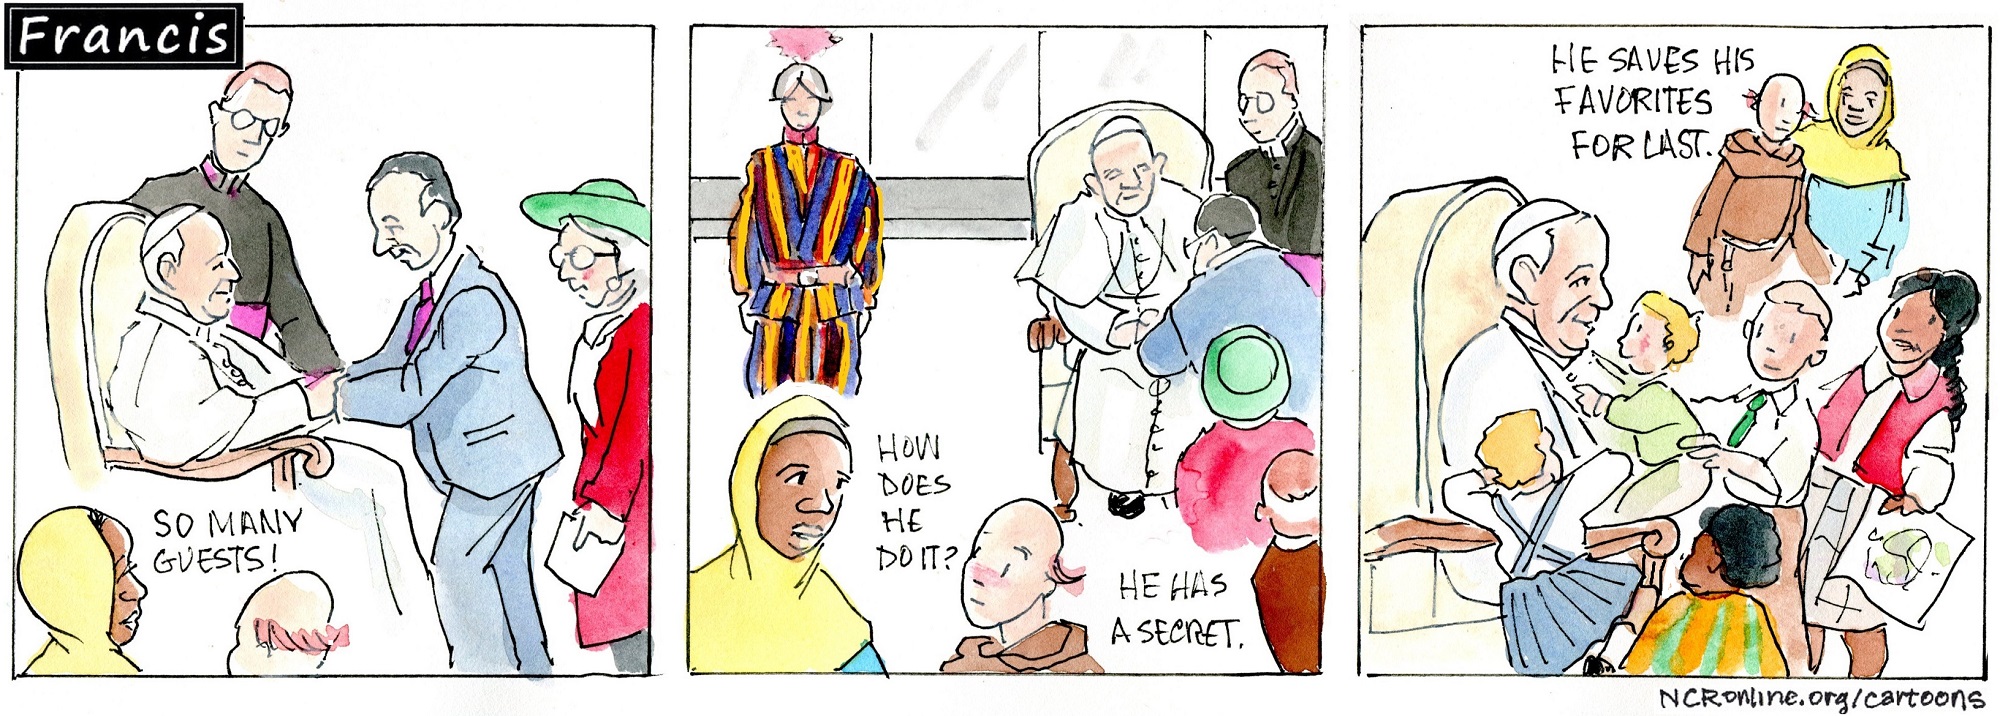 Francis, the comic strip: Francis entertains some special guests.